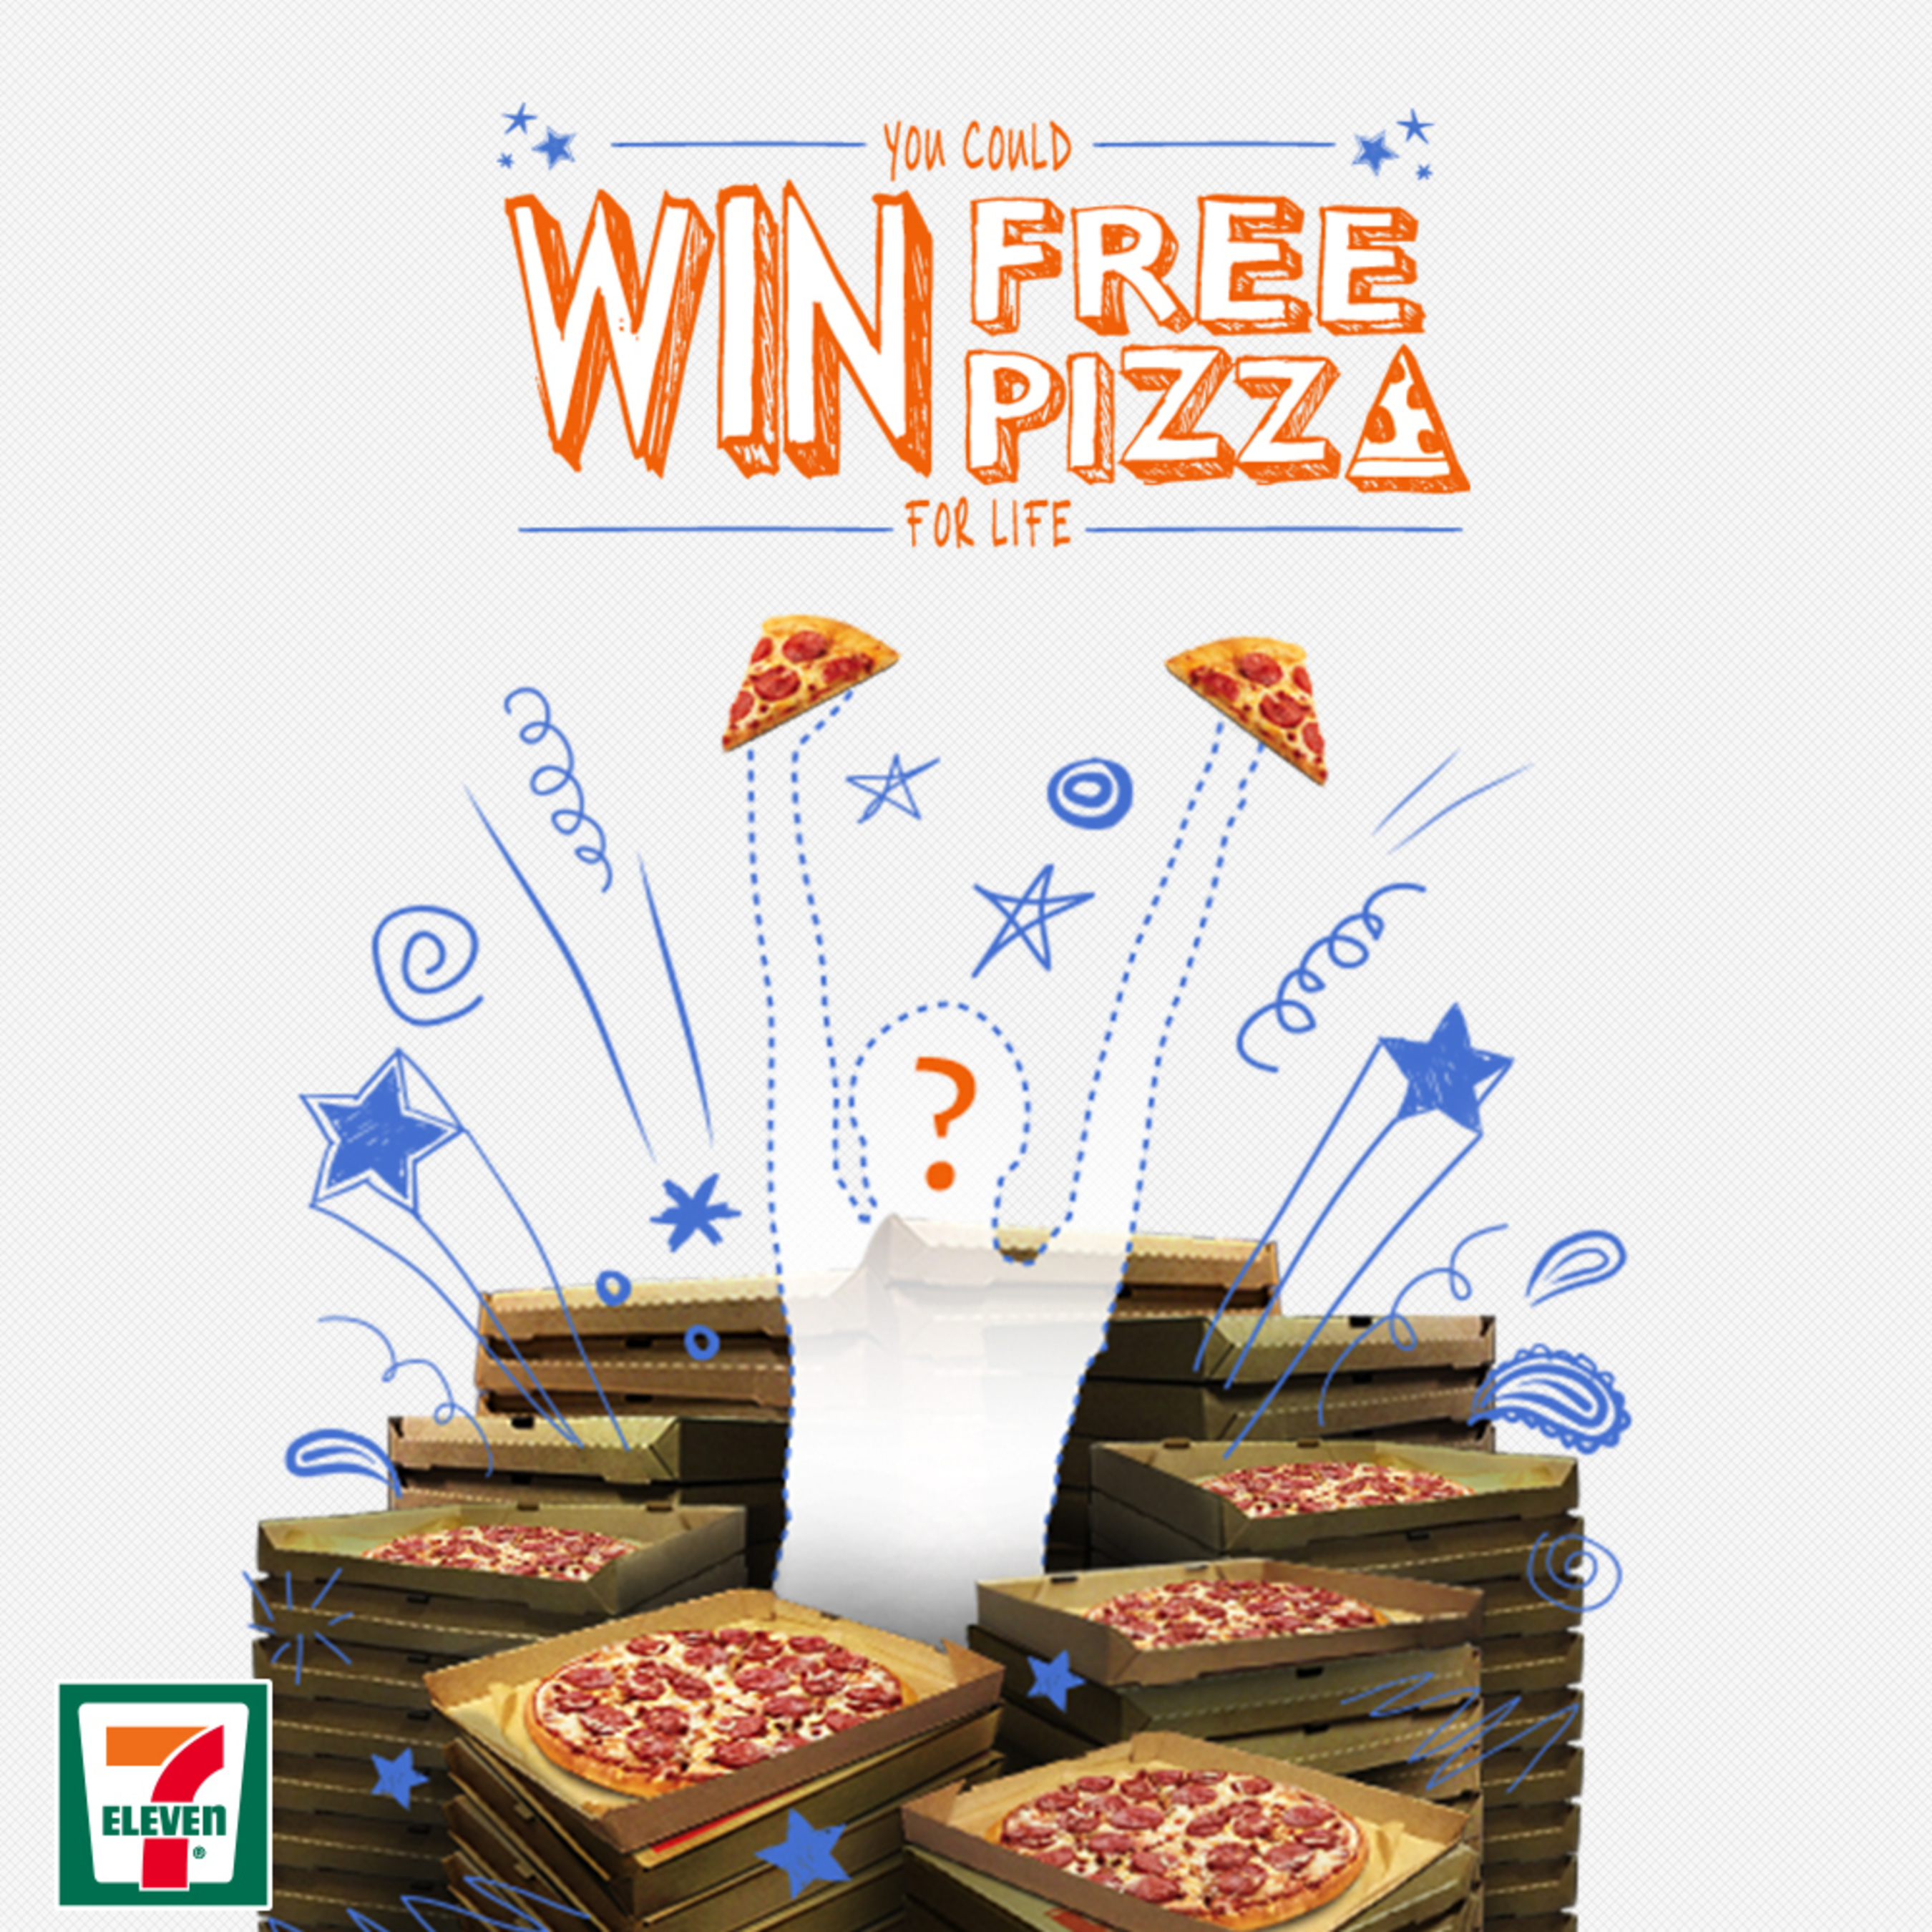 7-Eleven smartphone app offers pizza for life in contest through May 16. (PRNewsFoto/7-Eleven, Inc.)